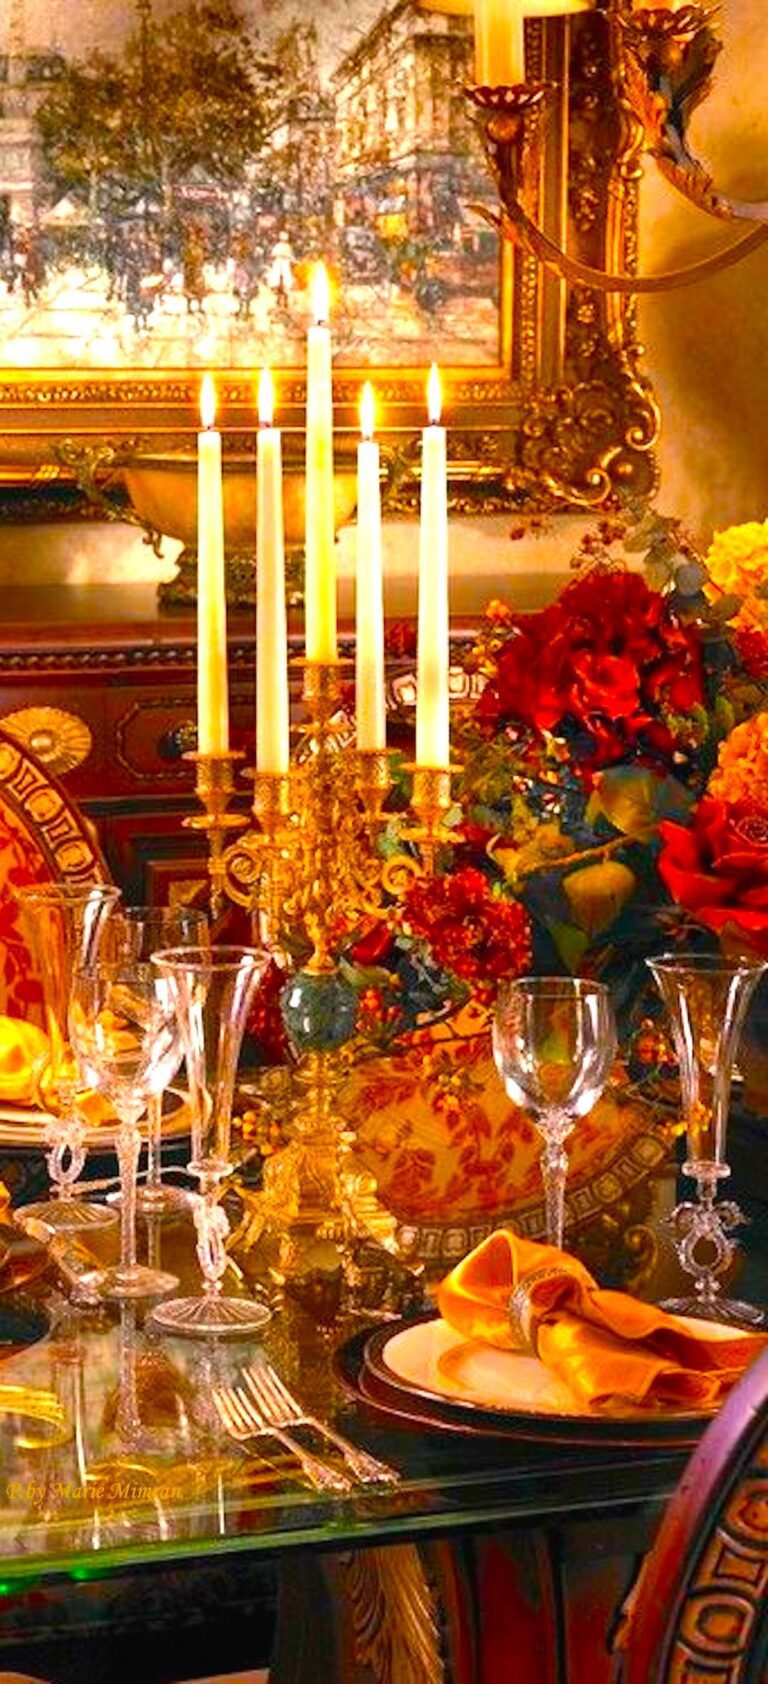 orange and red tablescape at night with lit candelabra